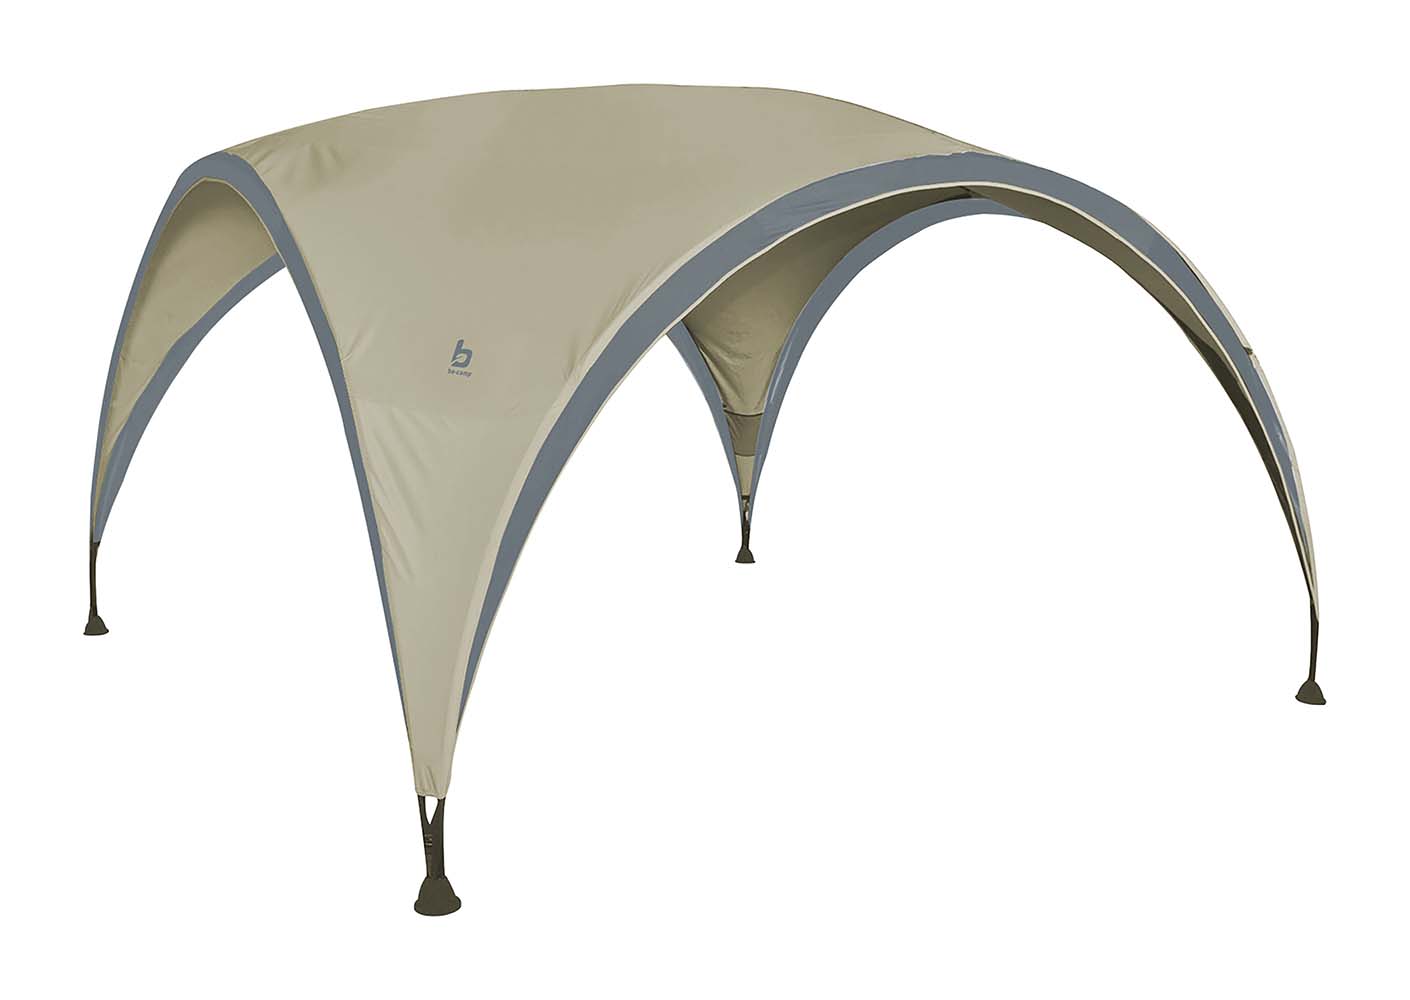 4472201 A large party shelter. Ideal for outdoor activities and events. This party shelter has an extremely sold tent canvas of 160 gr/m² polyester. This canvas is water proof (water column 1500 mm), UV resistant, flame retardant and has ventilation at the top. The strong steel bow poles and the stable feet ensure that this shelter is extra sturdy and stable, even on swampy surfaces. The shelter is easy to set-up and to extend with various side walls that are fixed by means of velcro. Supplied complete with guy ropes, pegs and a transport bag.